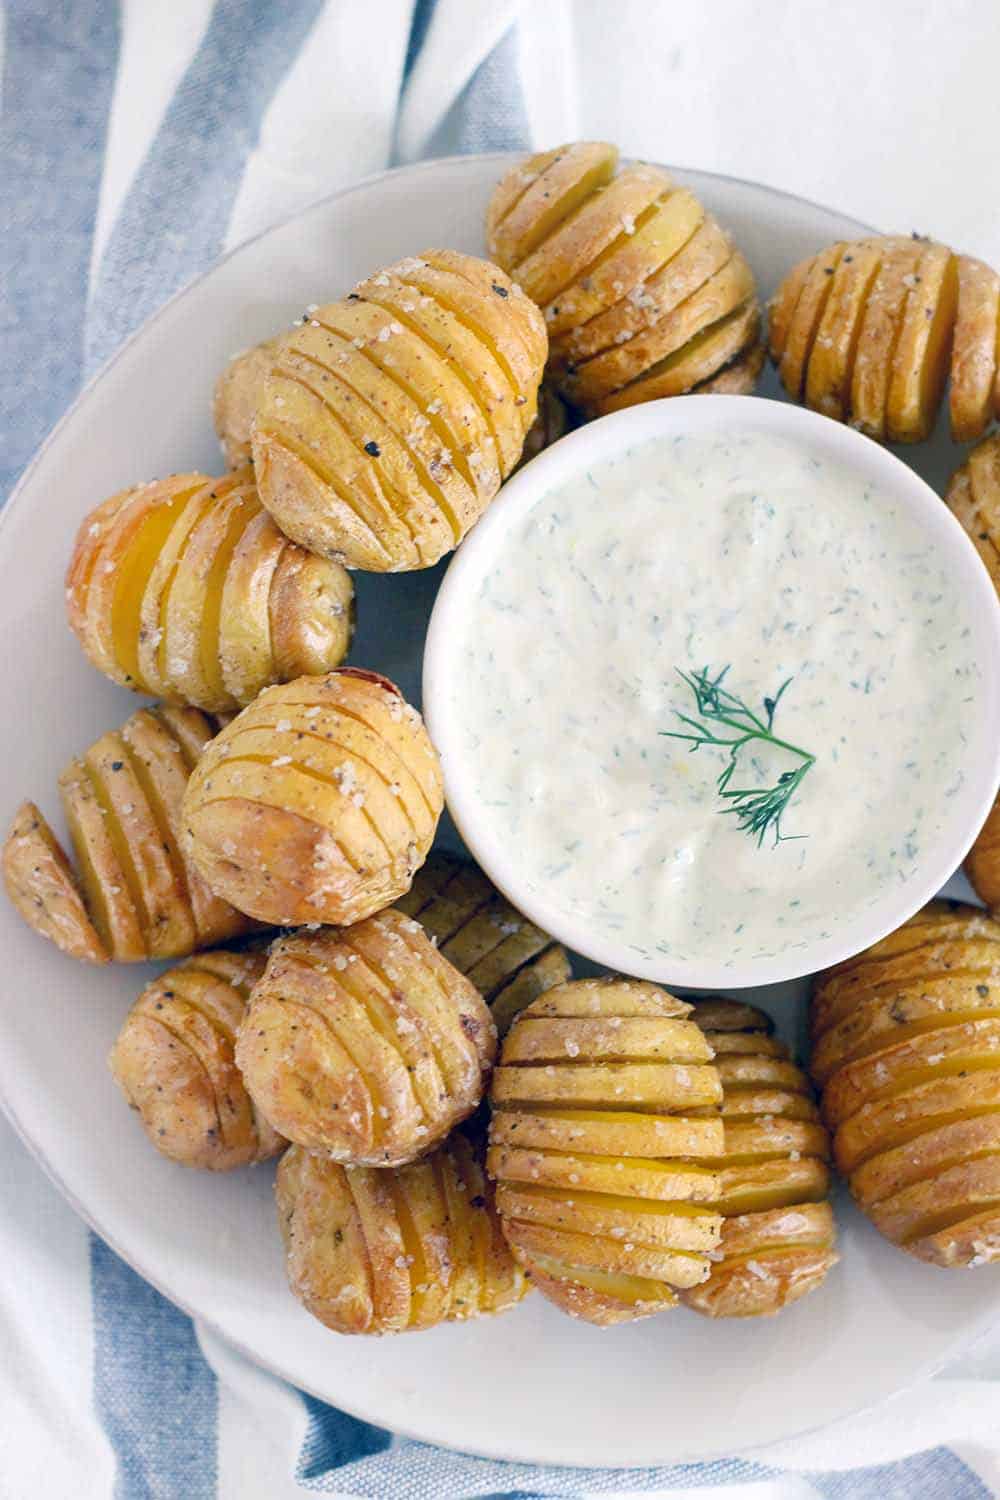 Perfect as an appetizer, these Mini Hasselback Potatoes with Creamy Dill Dip are dunkable and delicious! Gluten free, vegetarian, and perfect for the holidays.